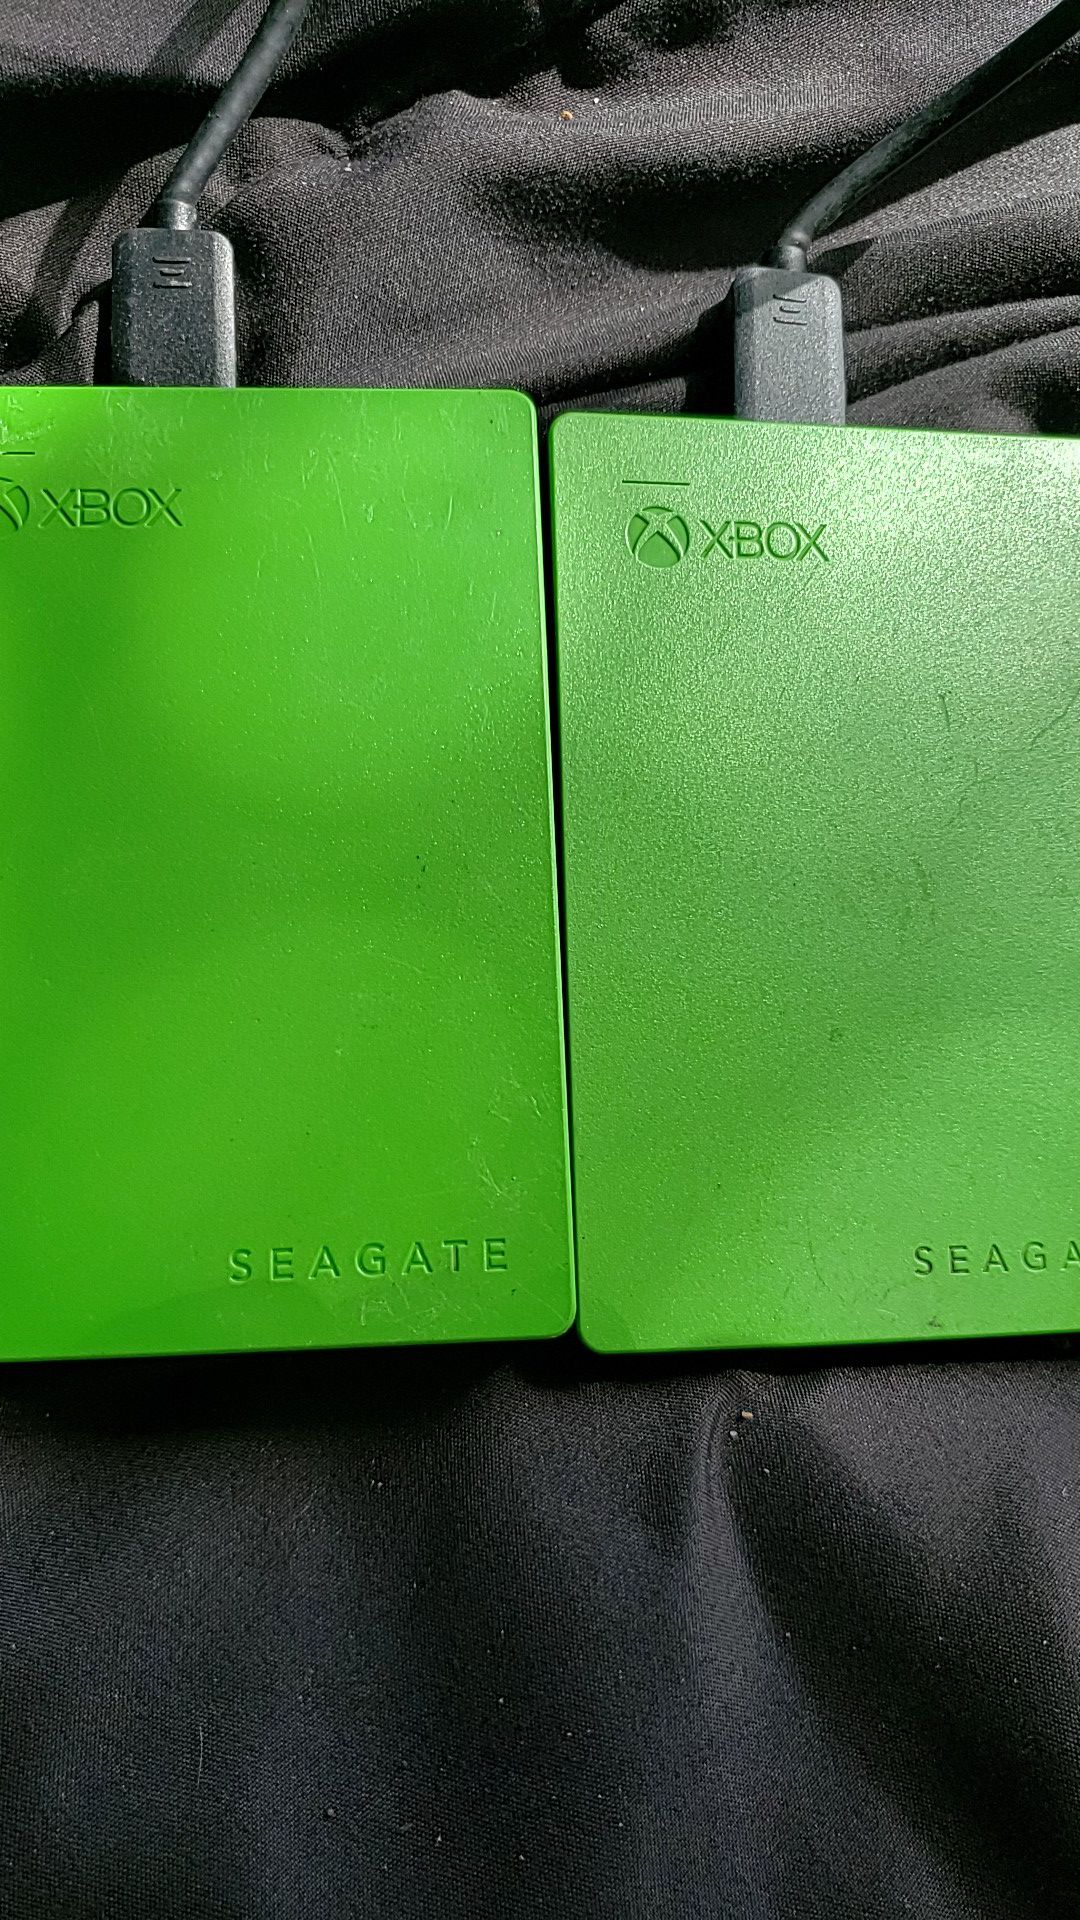 Seagate 2tb and 4 tb for xbox one